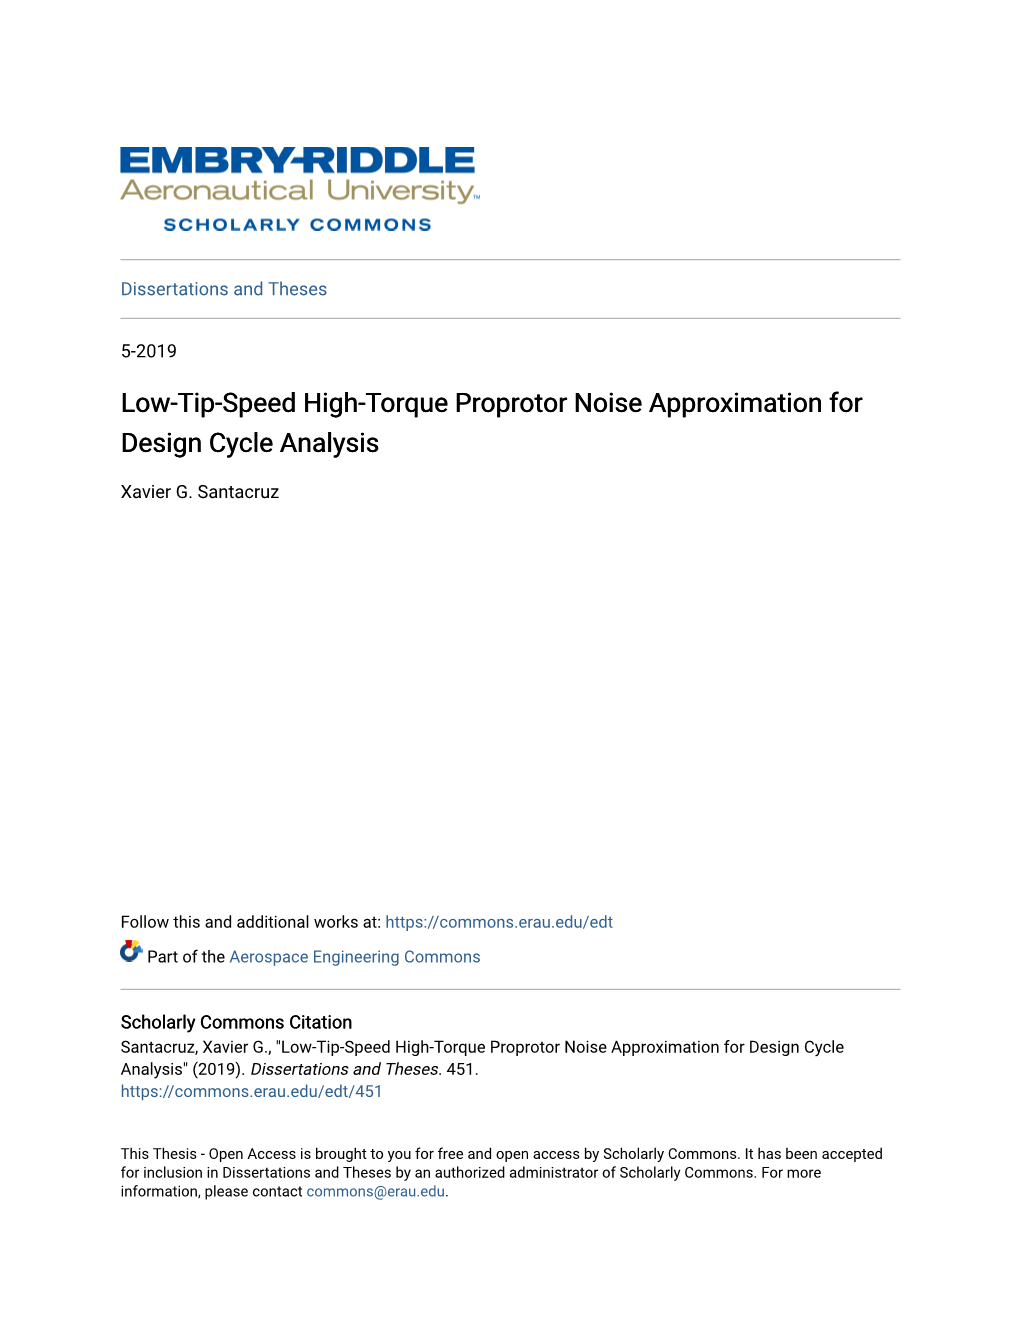 Low-Tip-Speed High-Torque Proprotor Noise Approximation for Design Cycle Analysis